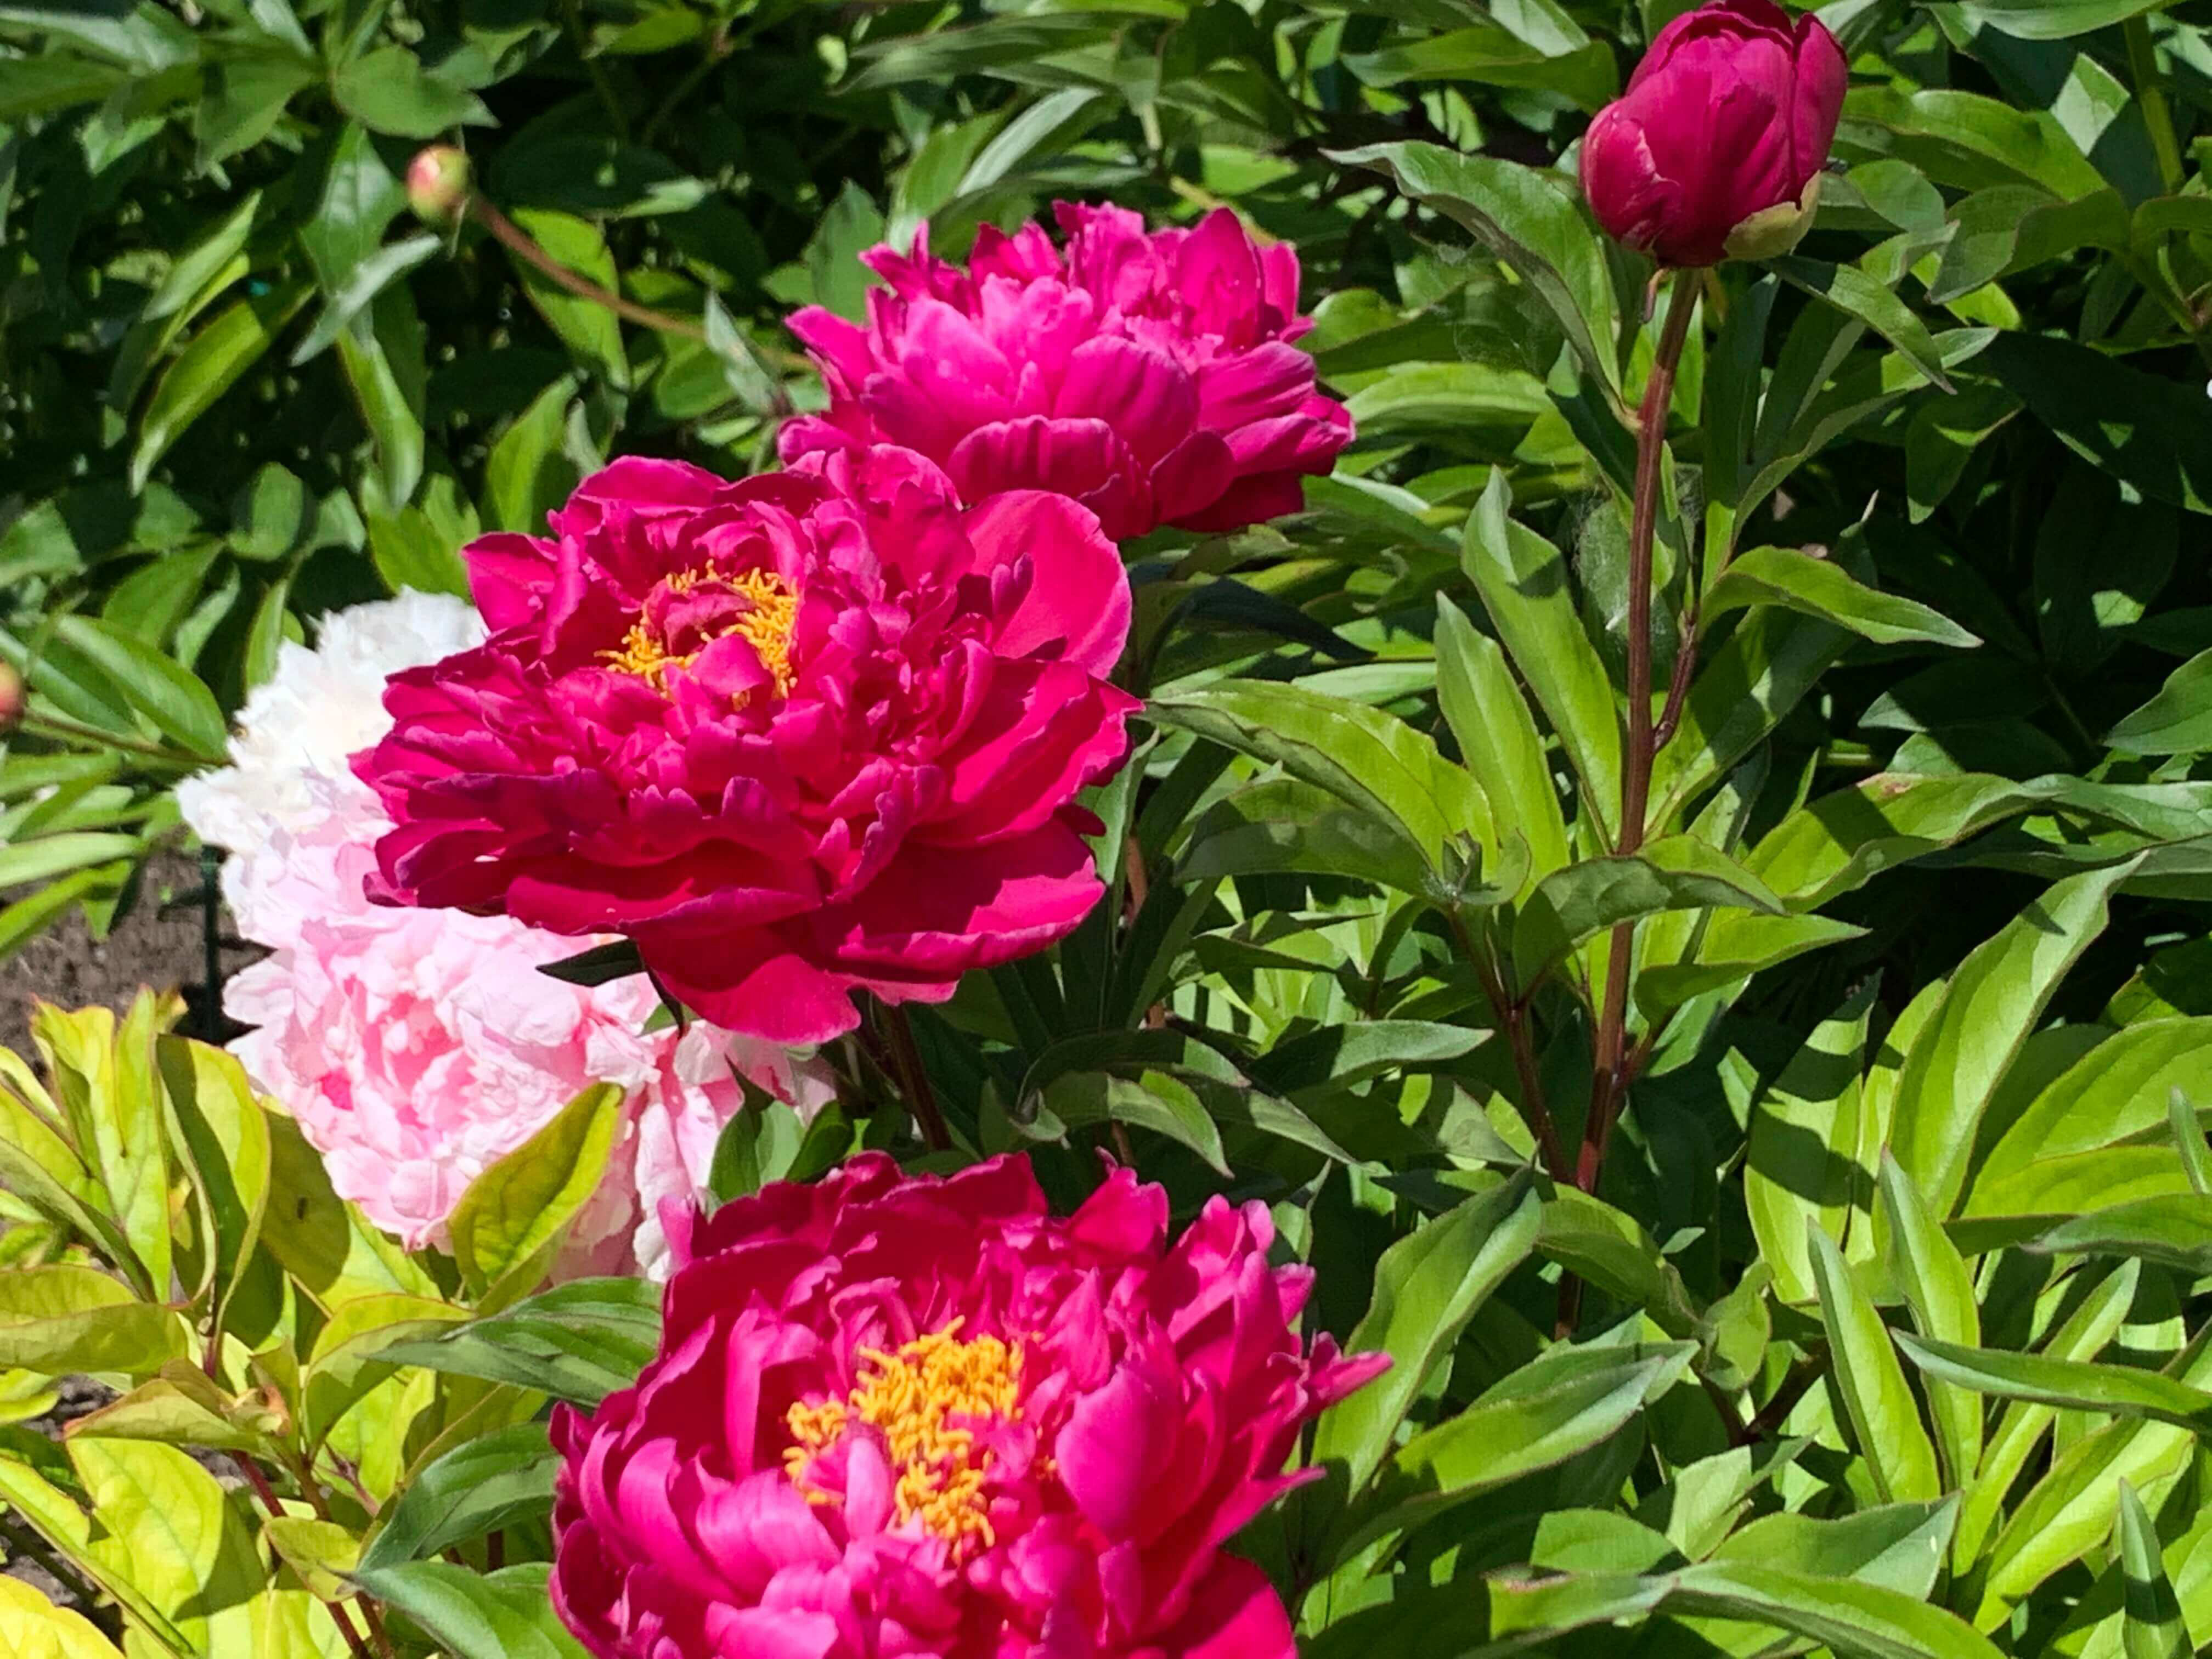 Red and white peony blooms